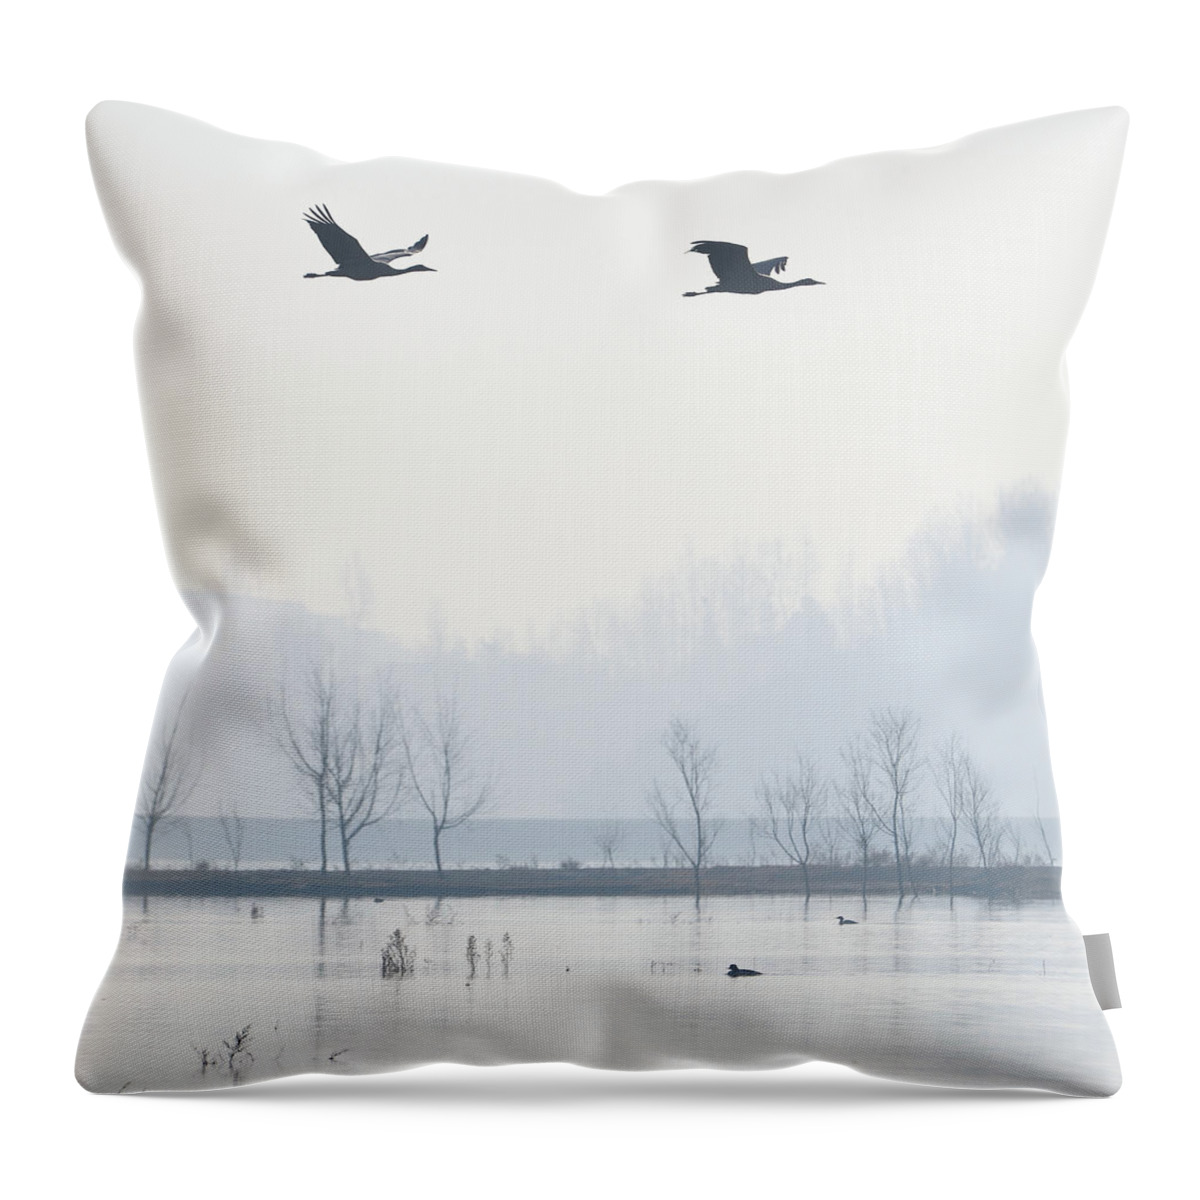 Animal Themes Throw Pillow featuring the photograph Bare Trees In Lake by Gary76973